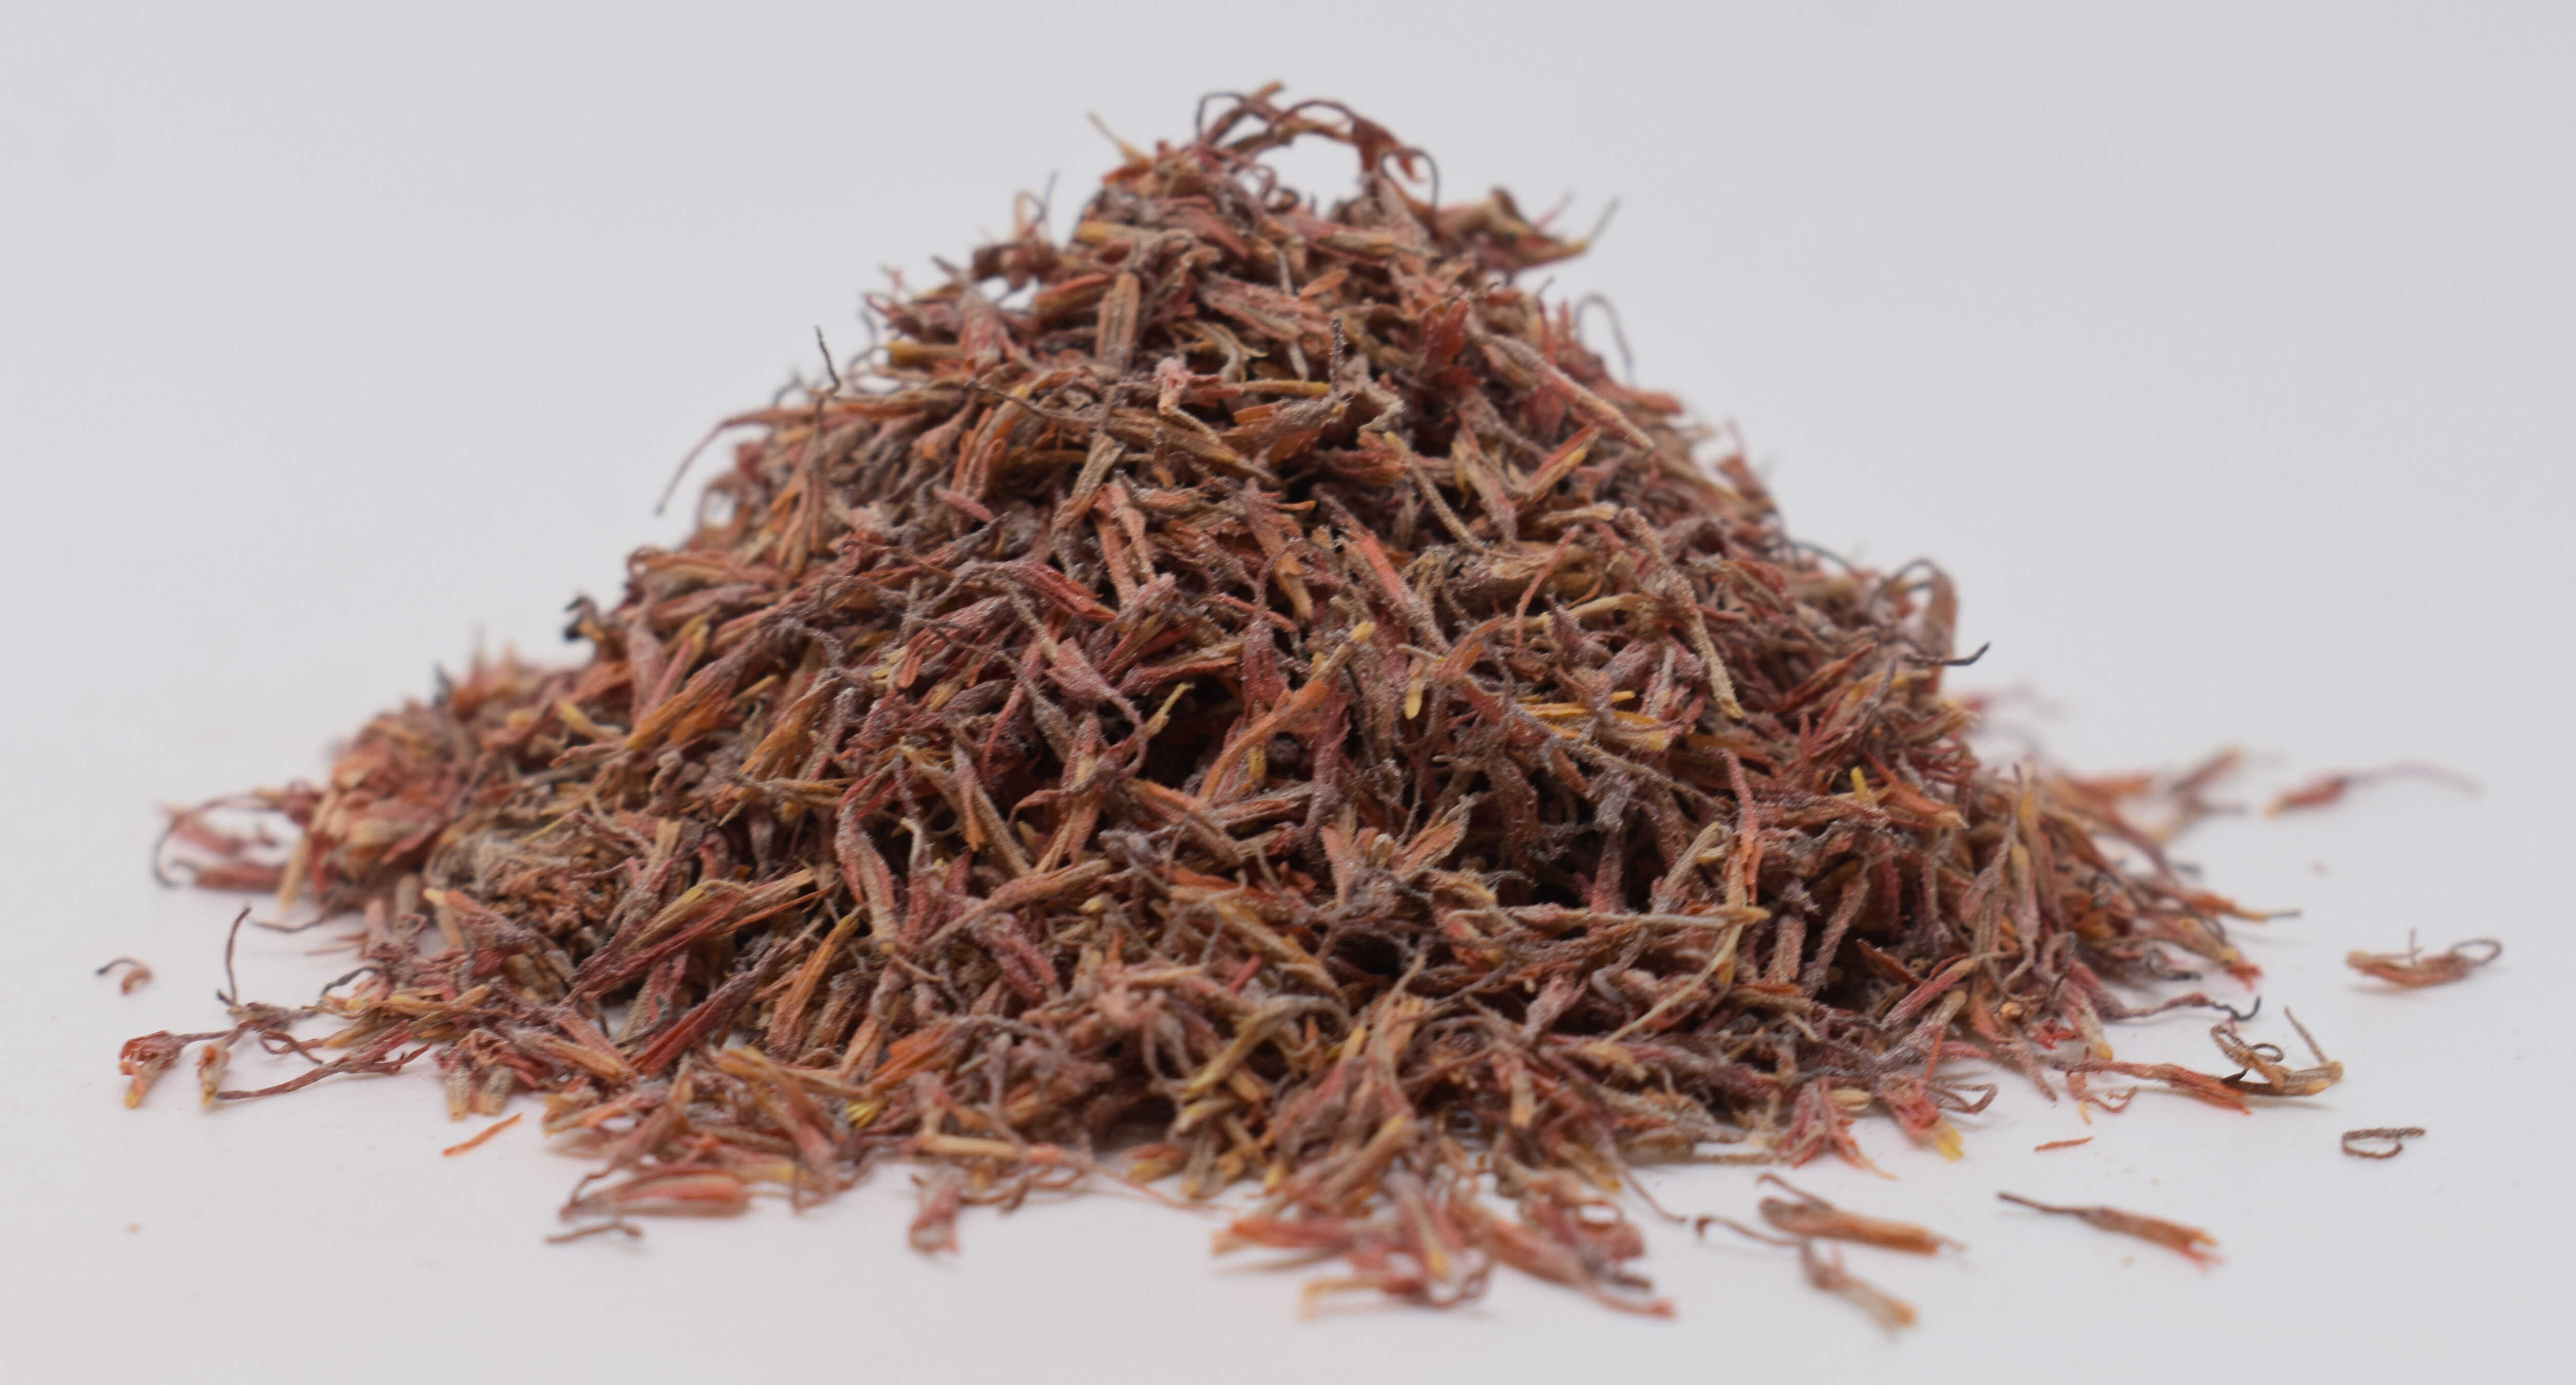 American Saffron and Slippery Elm - Side Photo